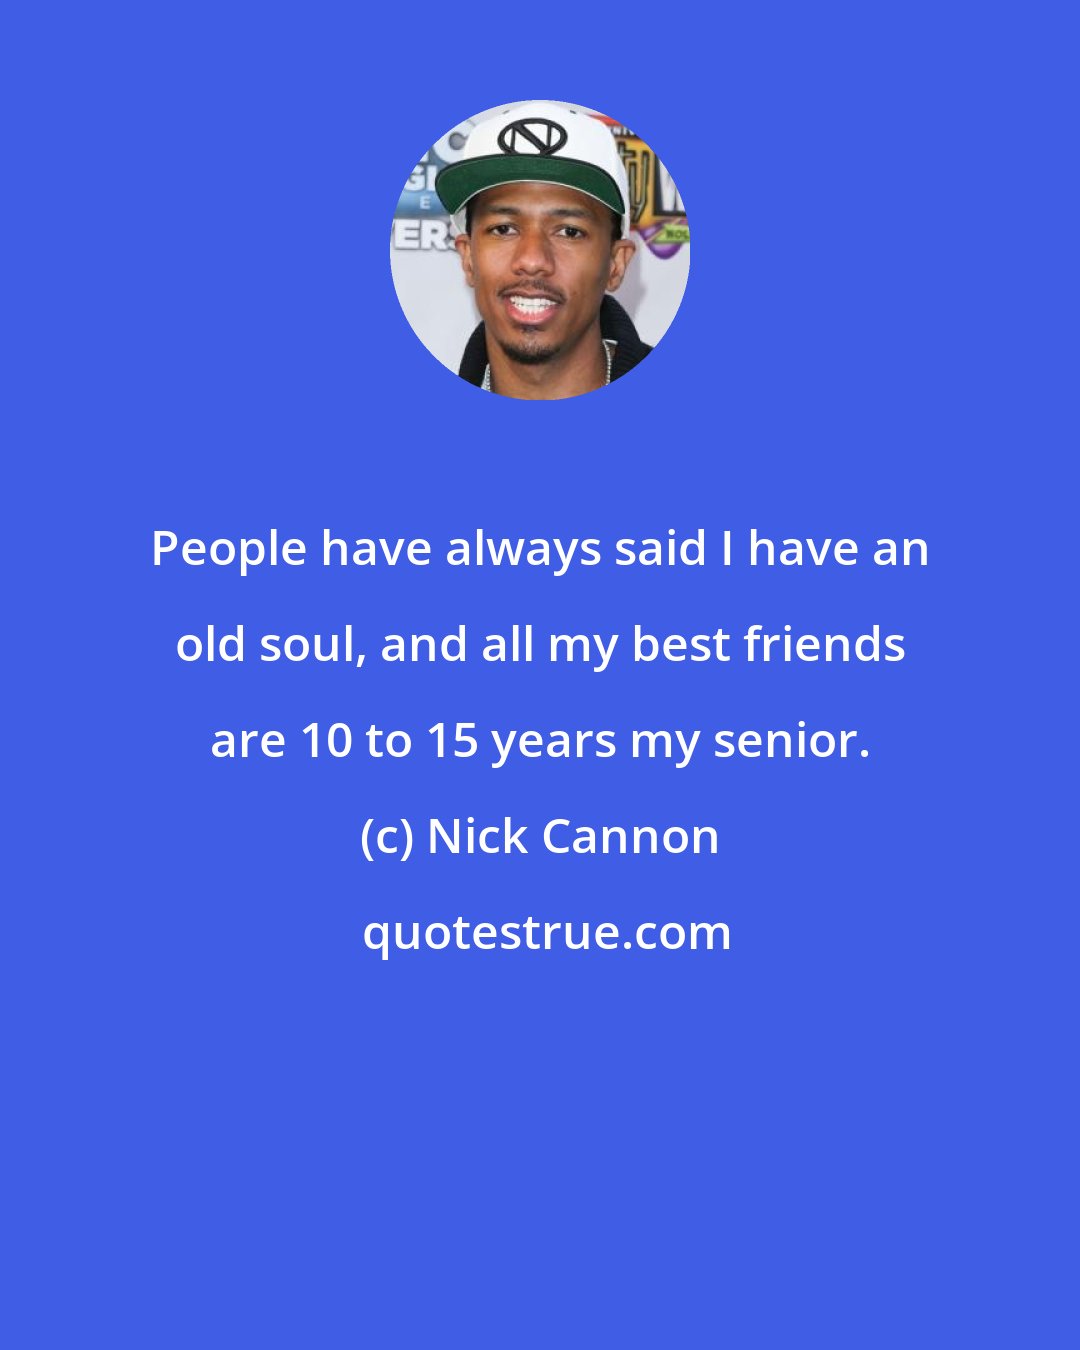 Nick Cannon: People have always said I have an old soul, and all my best friends are 10 to 15 years my senior.